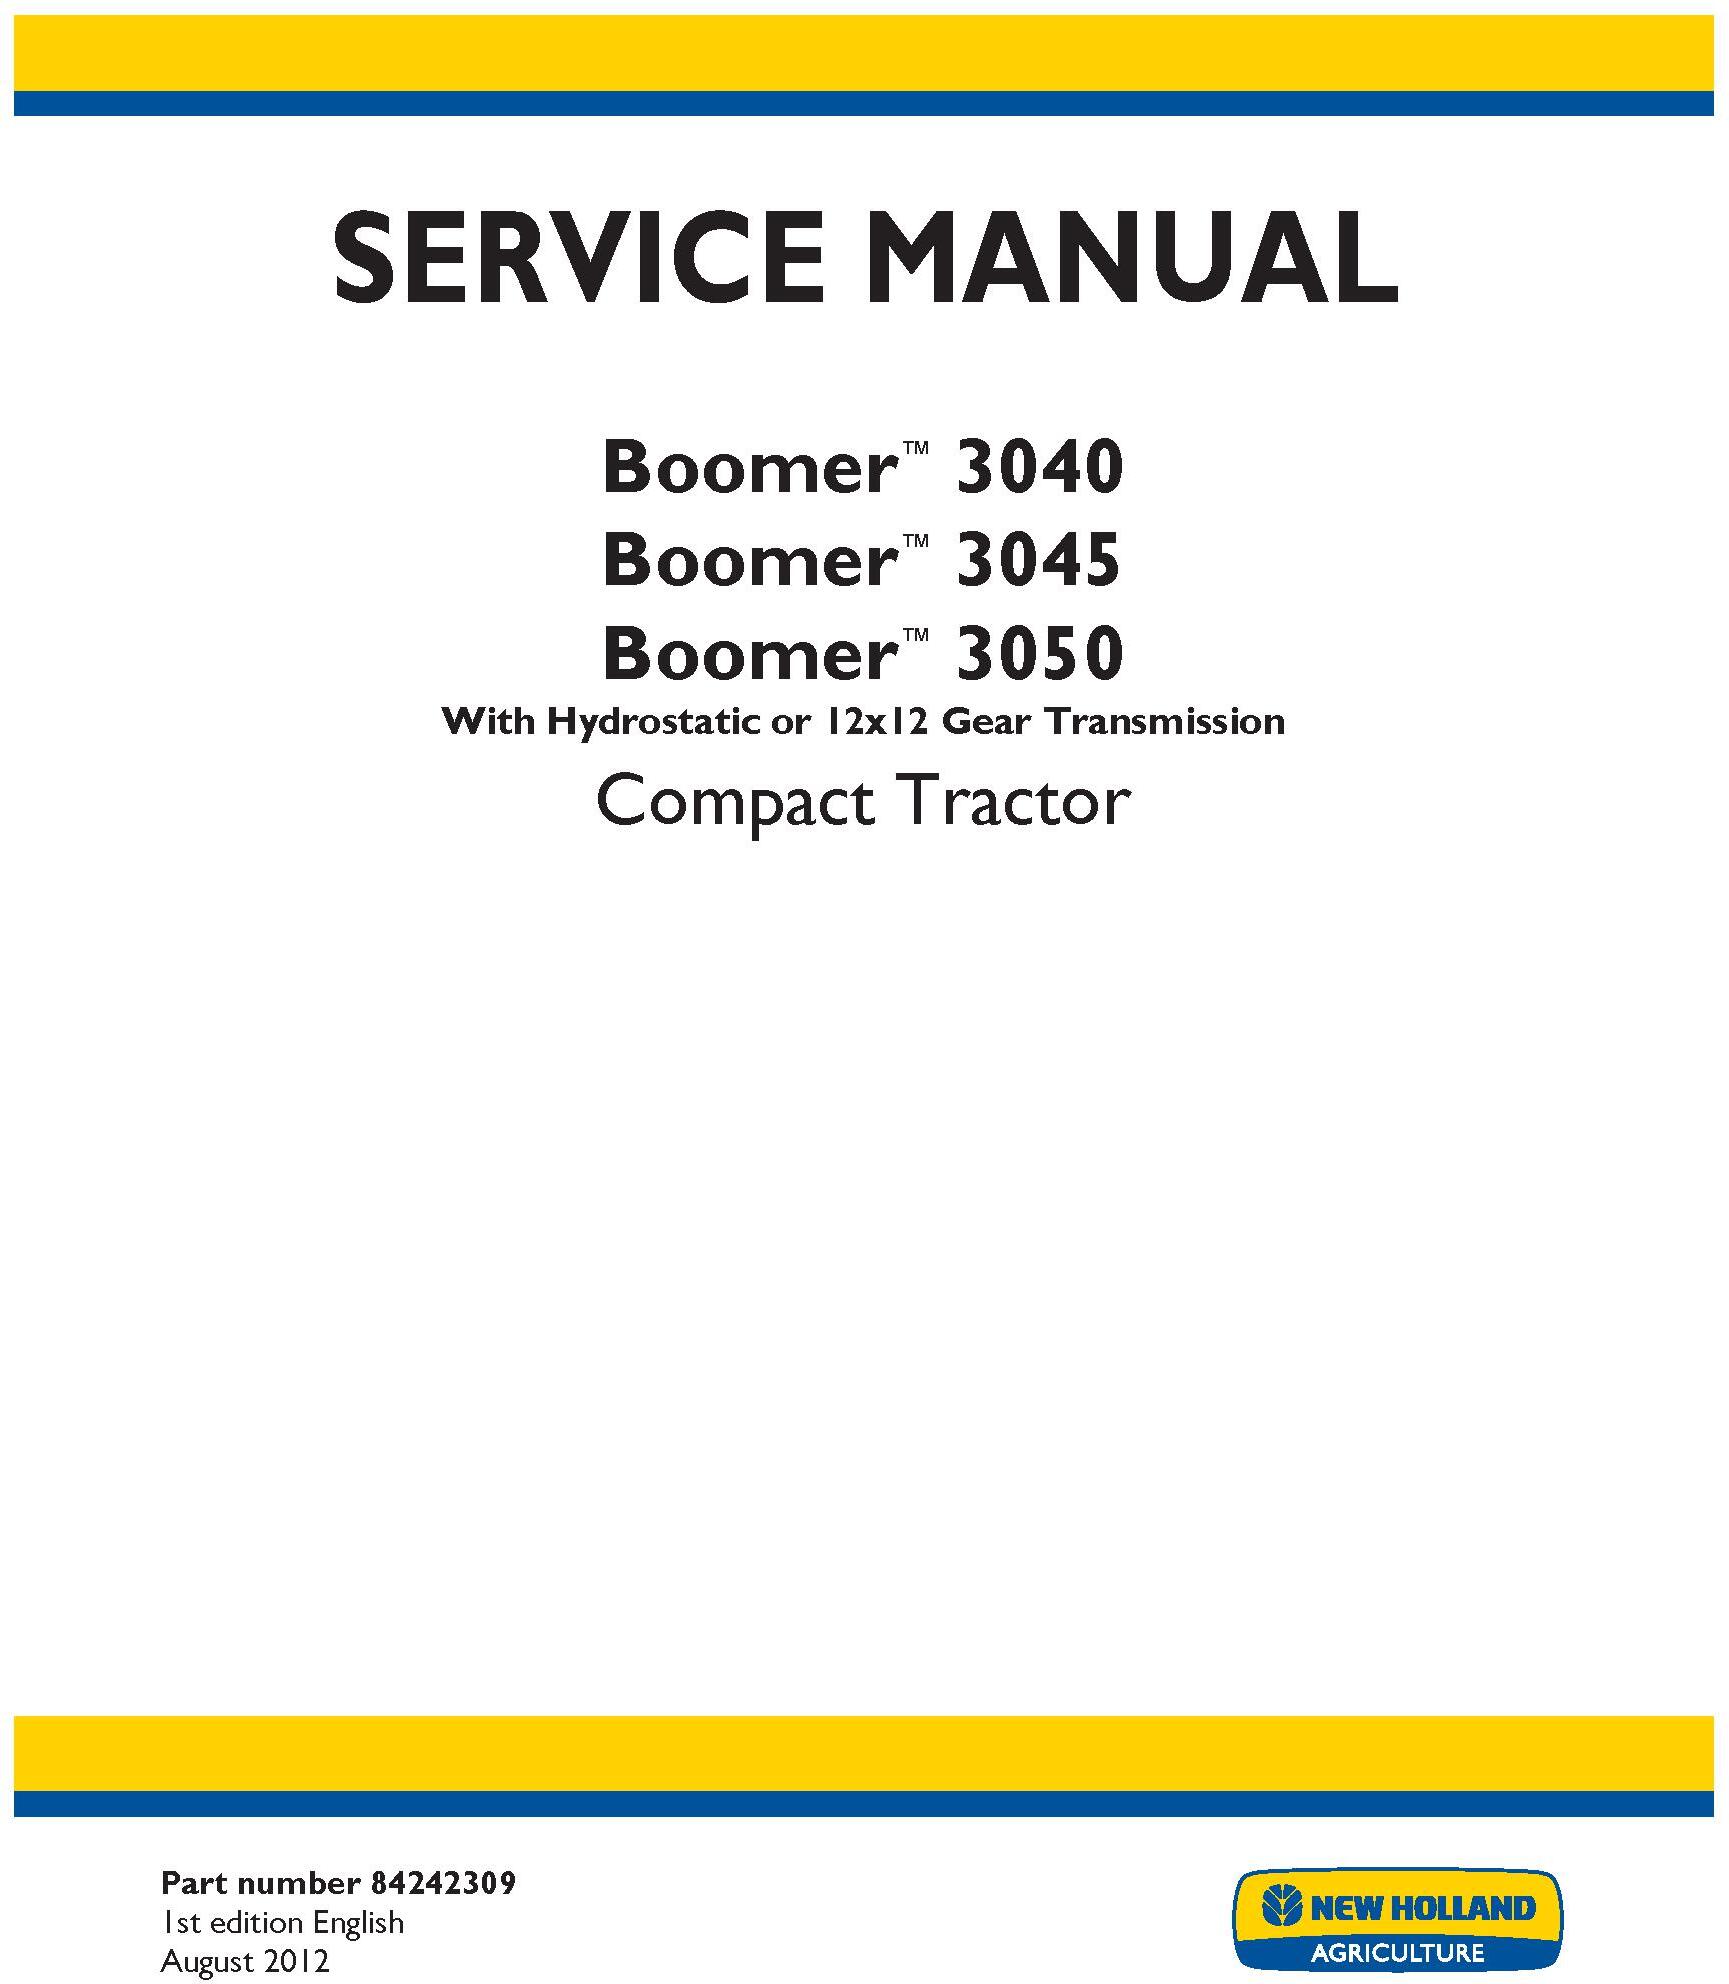 New Holland Boomer 3040, 3045, 3050 Compact Tractor (Hydrostatic or 2x12 Gear Trans.) Service Manual - 19557